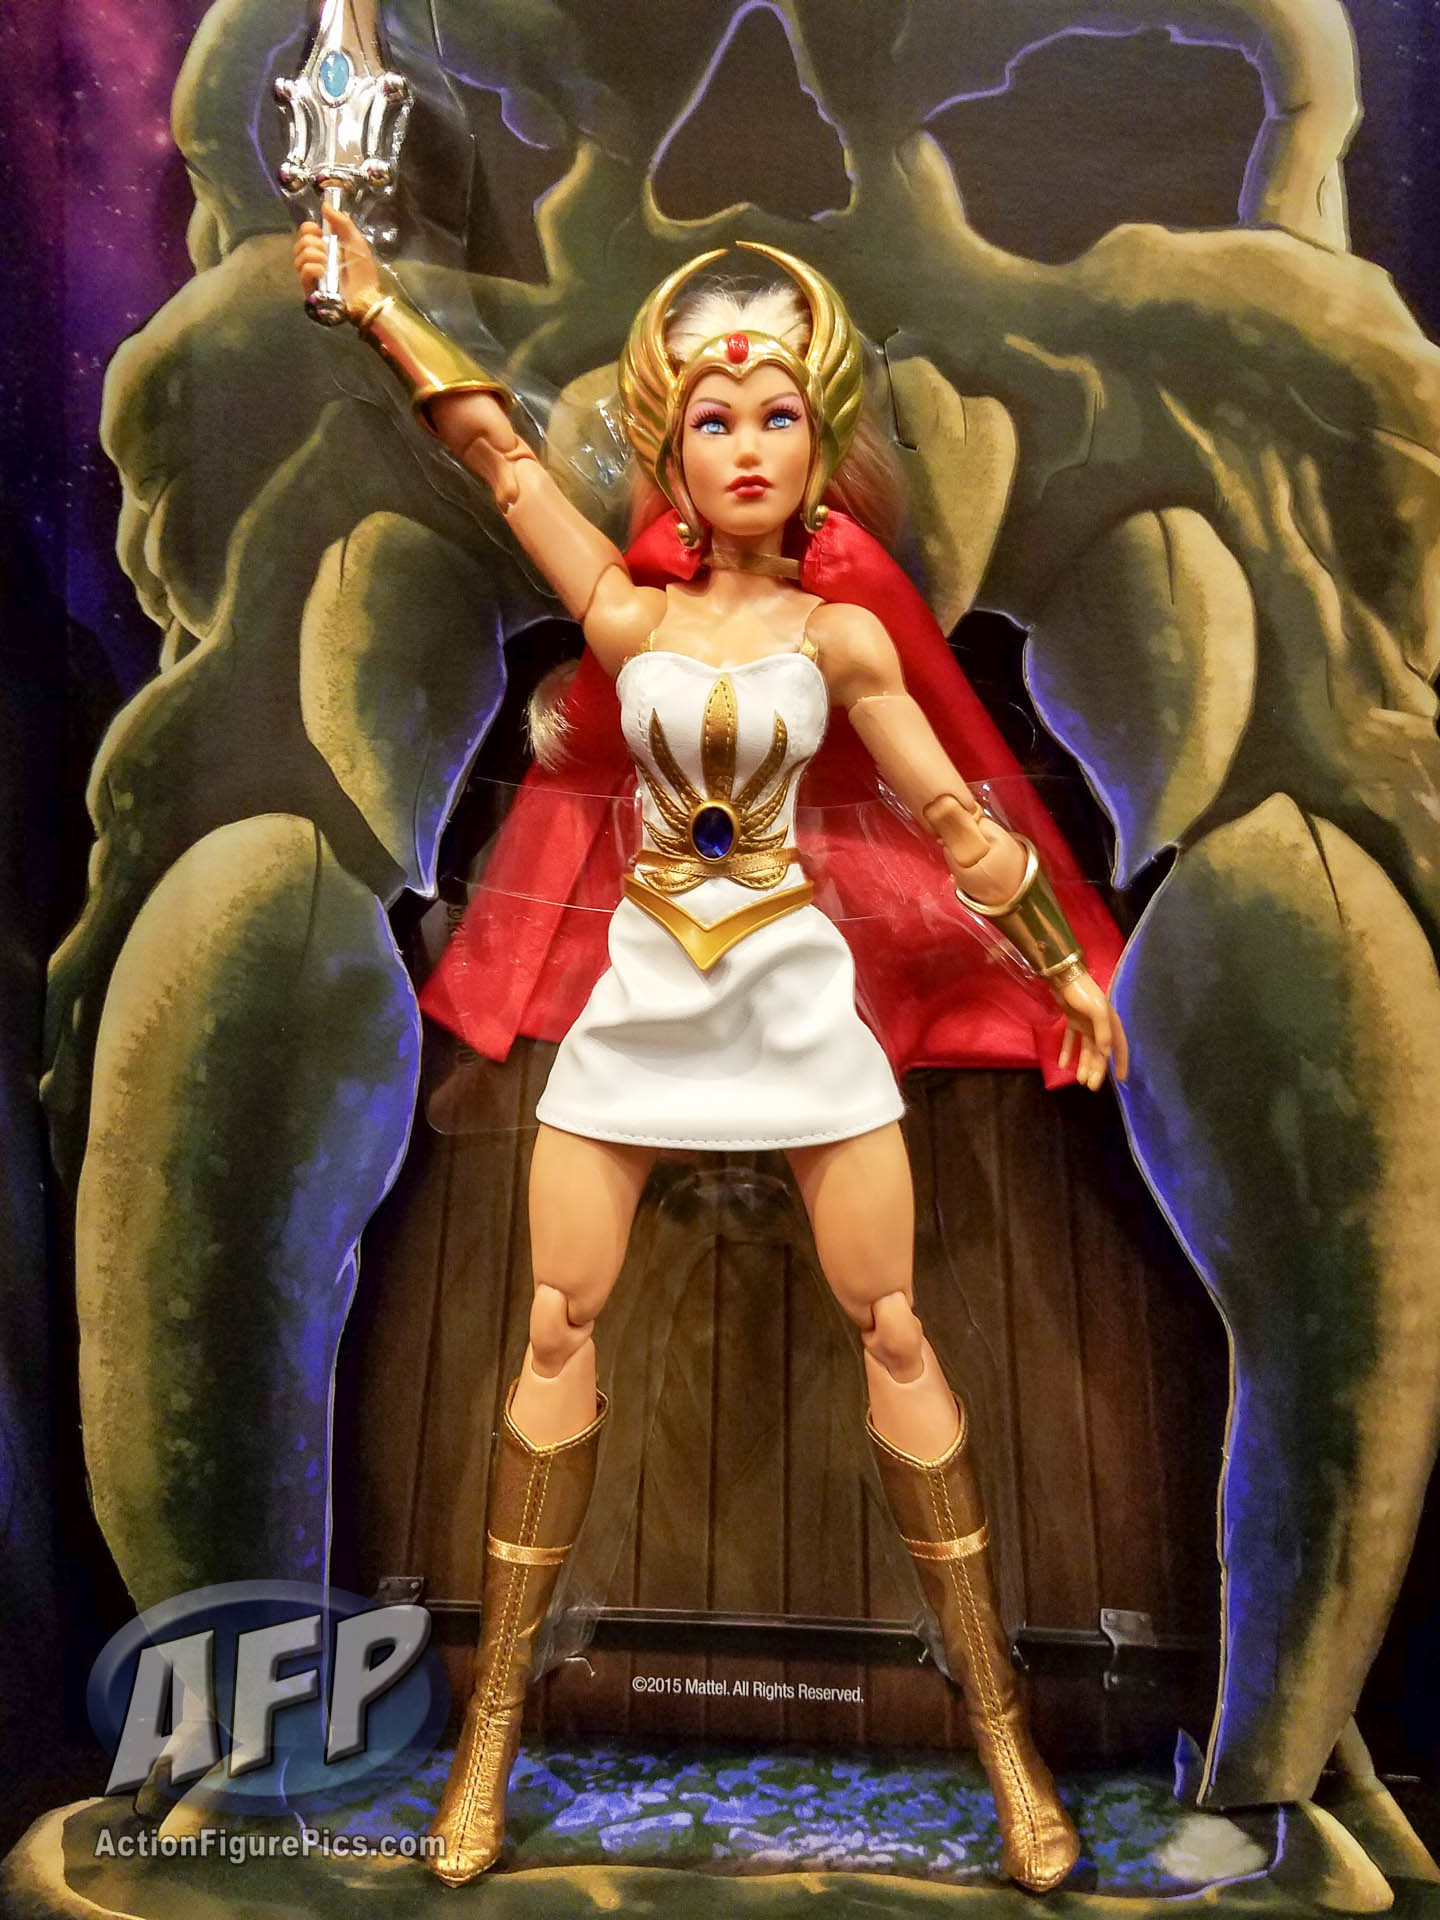 1440x1920 Power-Con 2016 - Mattel SDCC 2016 She-Ra Exclusive (6 of 13